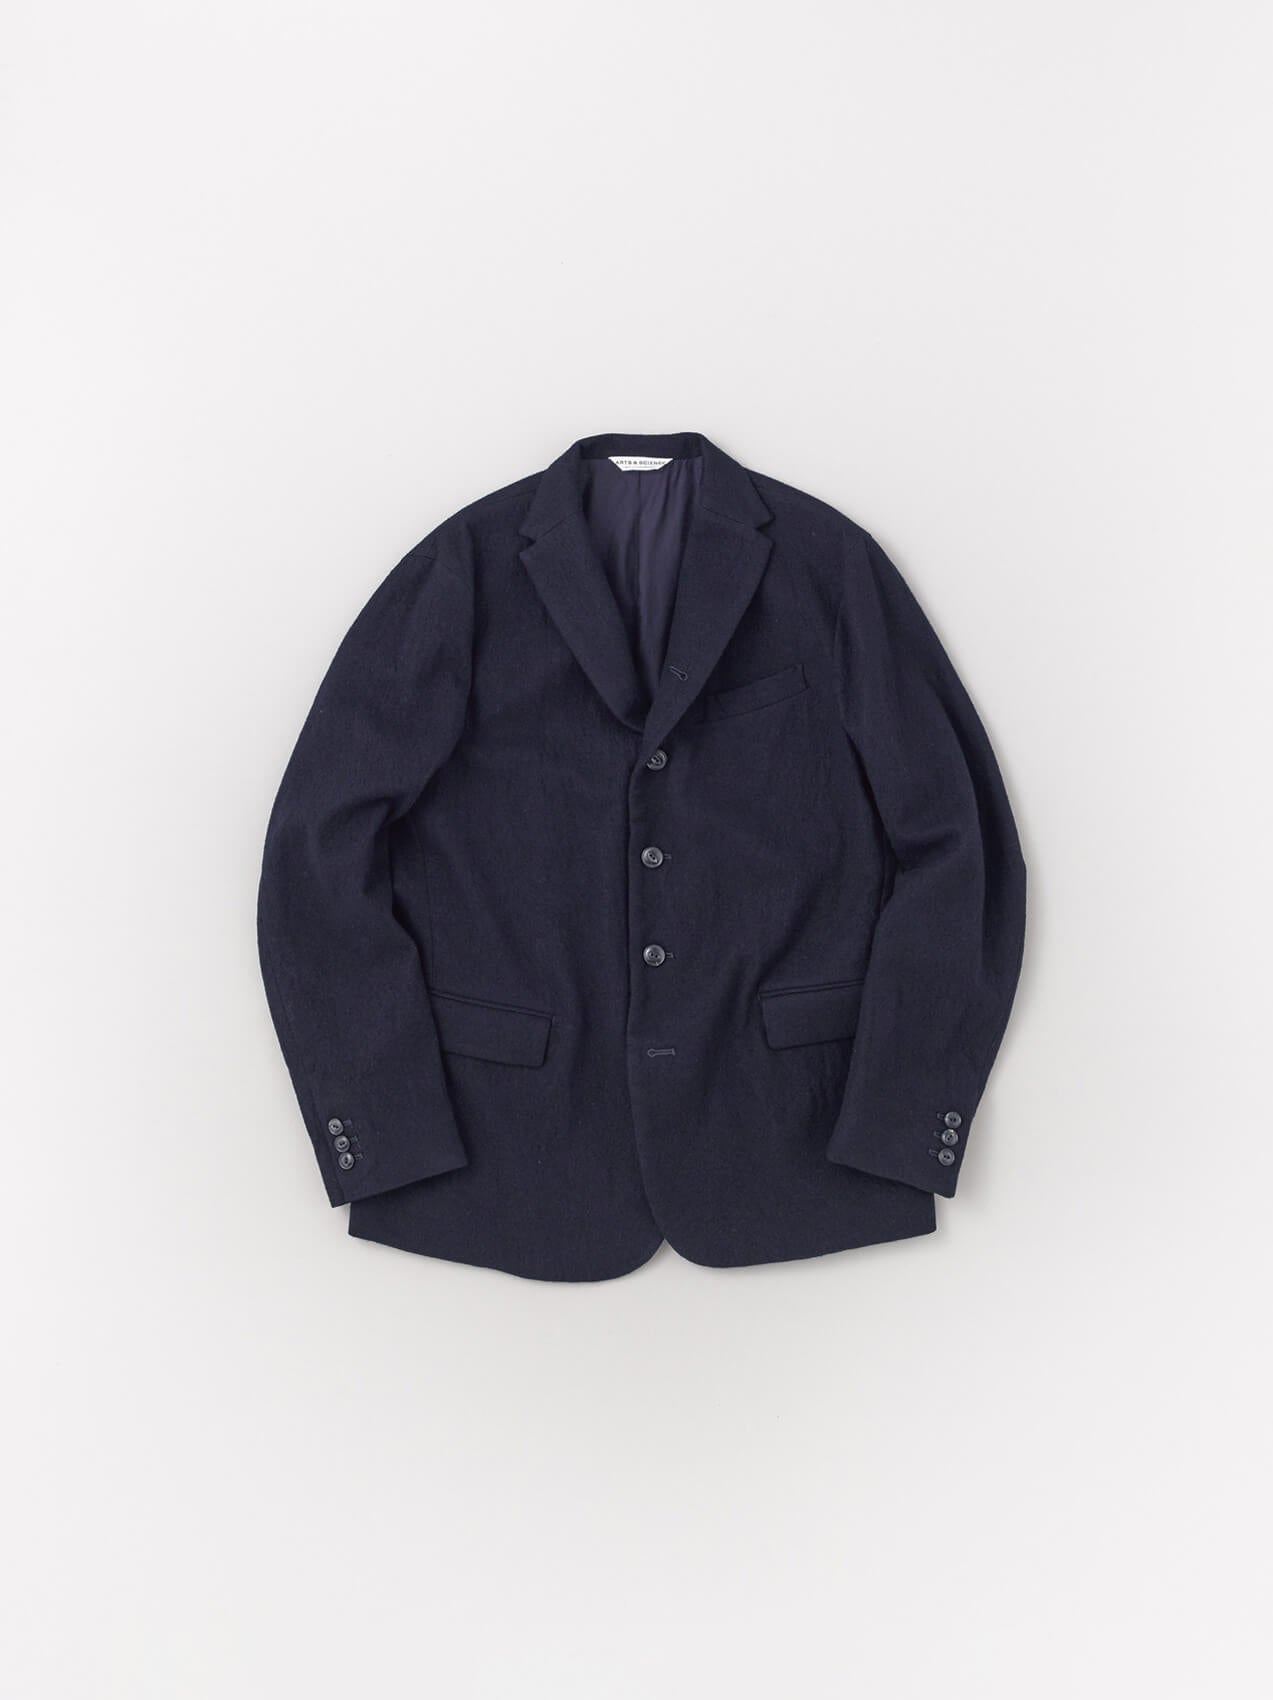 A&S Old Tailored Jacket 2-Navy/2